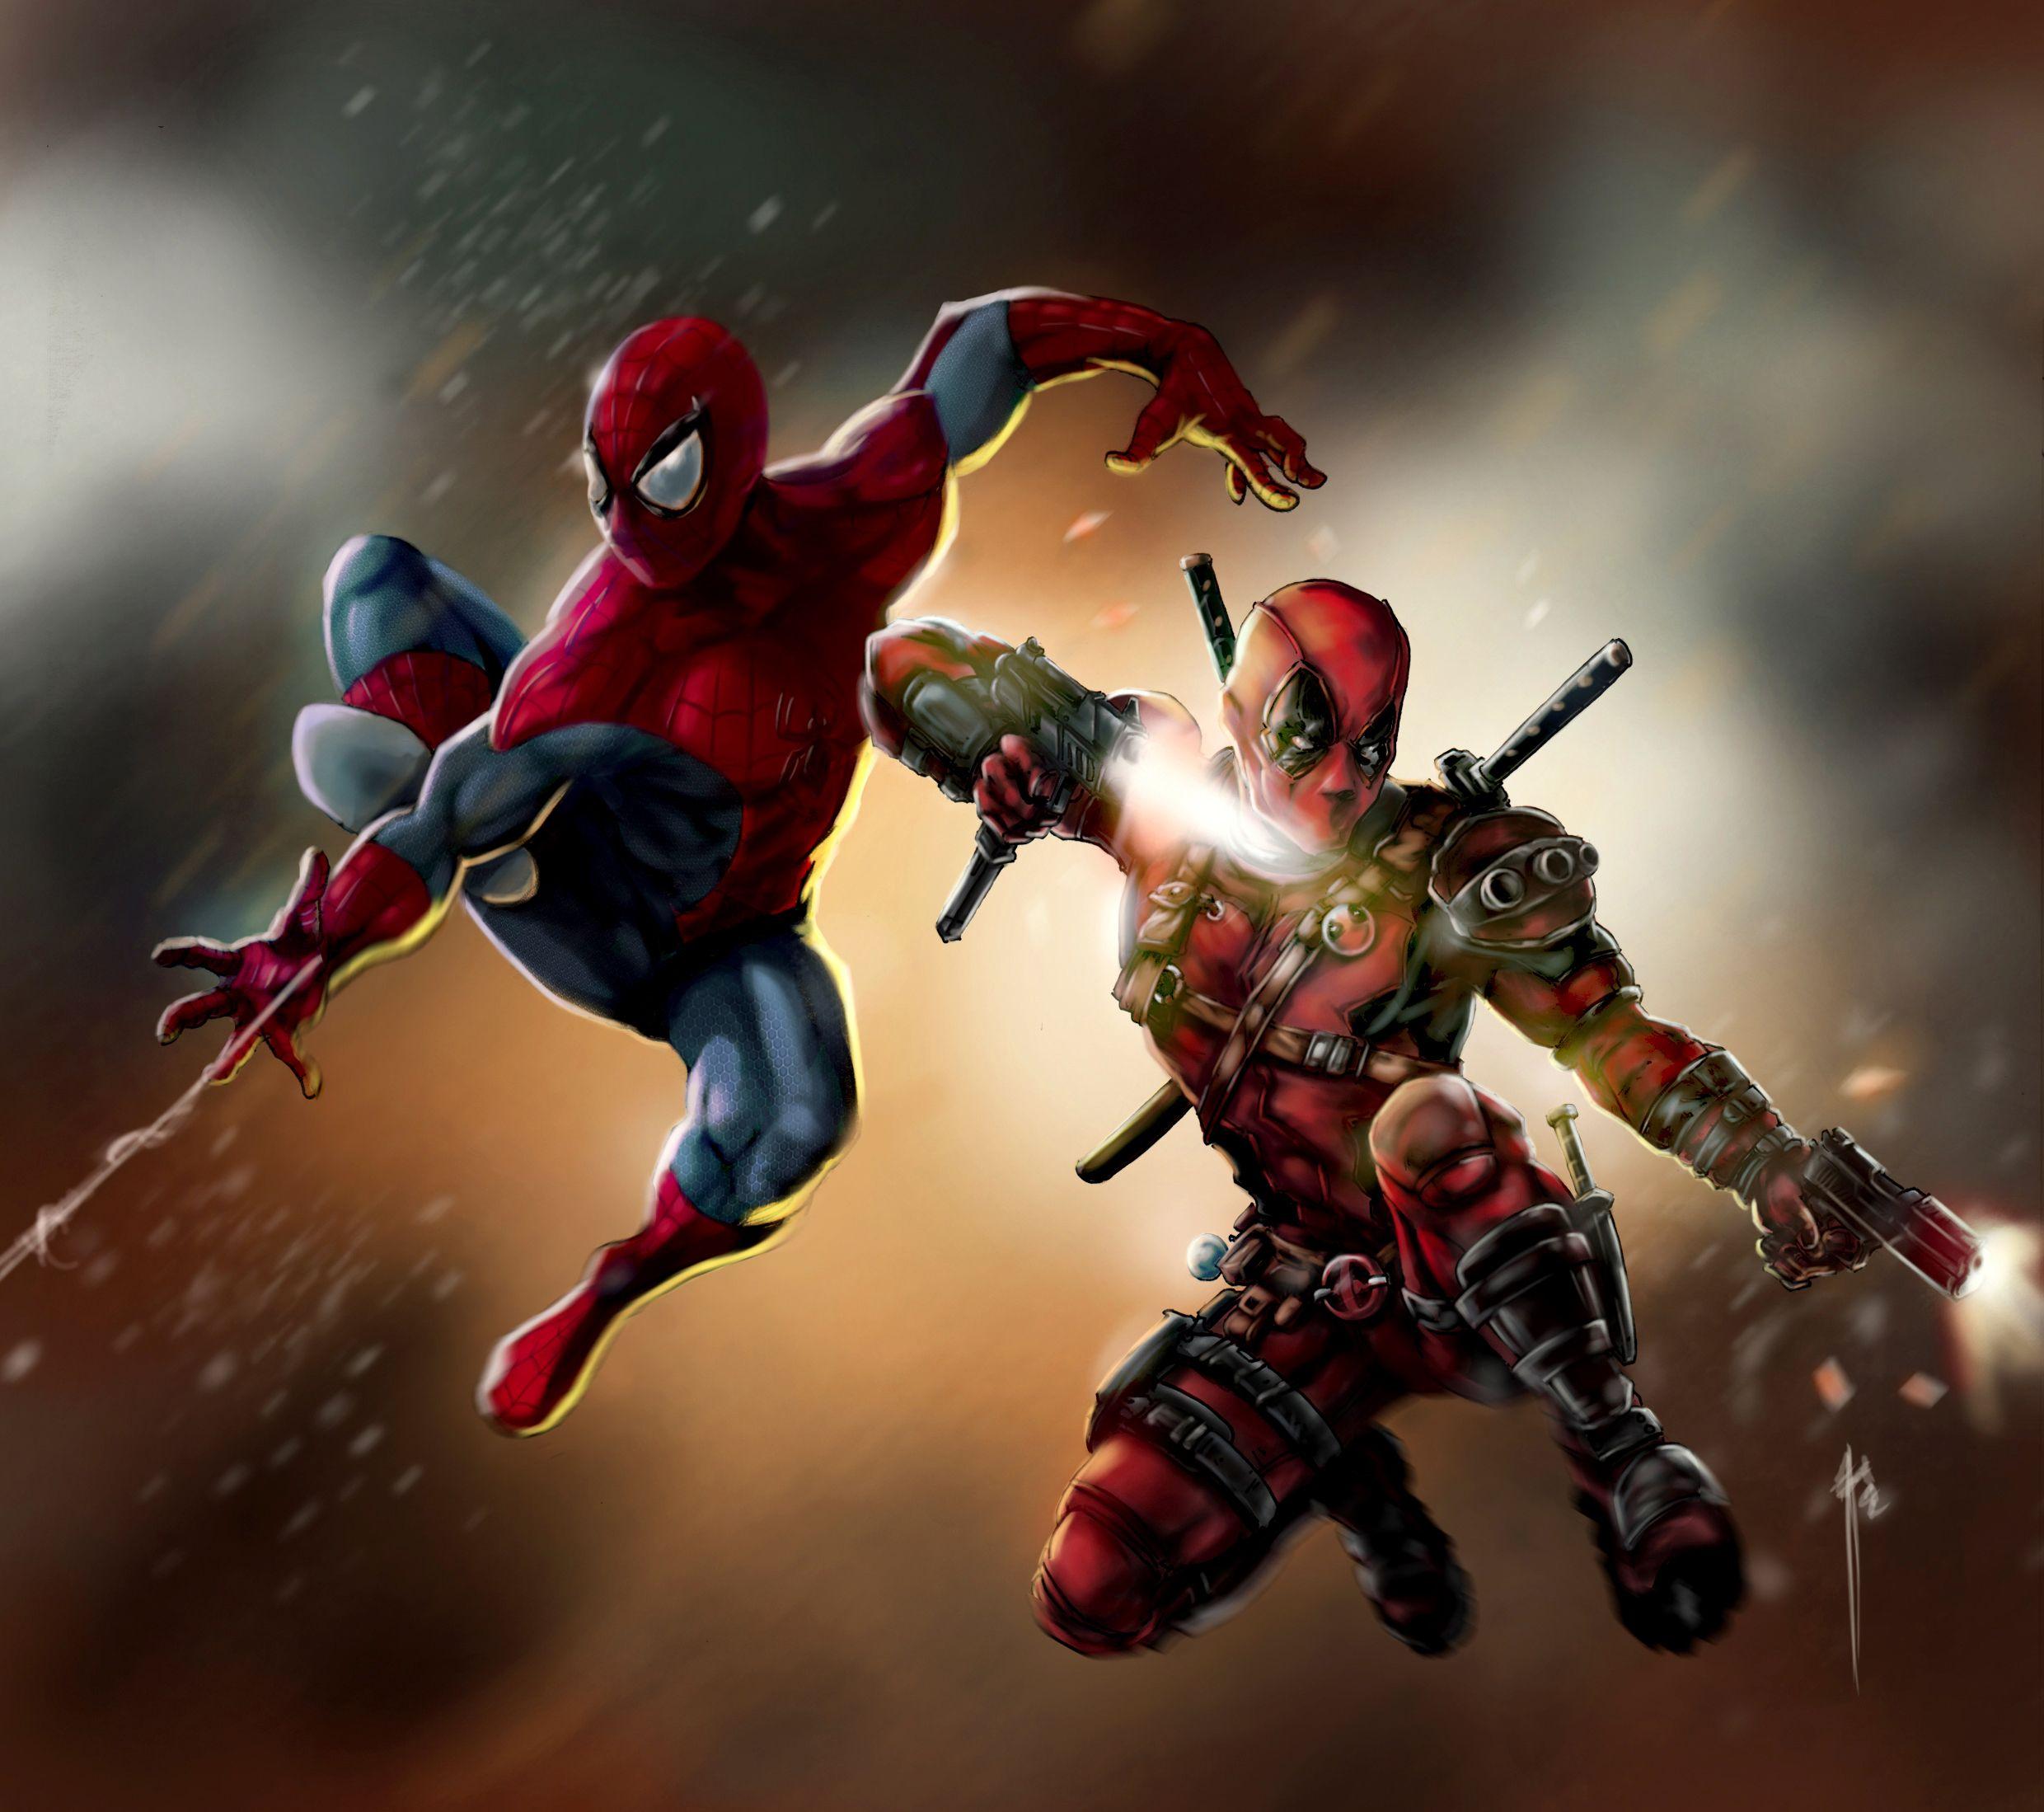 49 Deadpool and SpiderMan Wallpapers HD 4K 5K for PC and Mobile   Download free images for iPhone Android